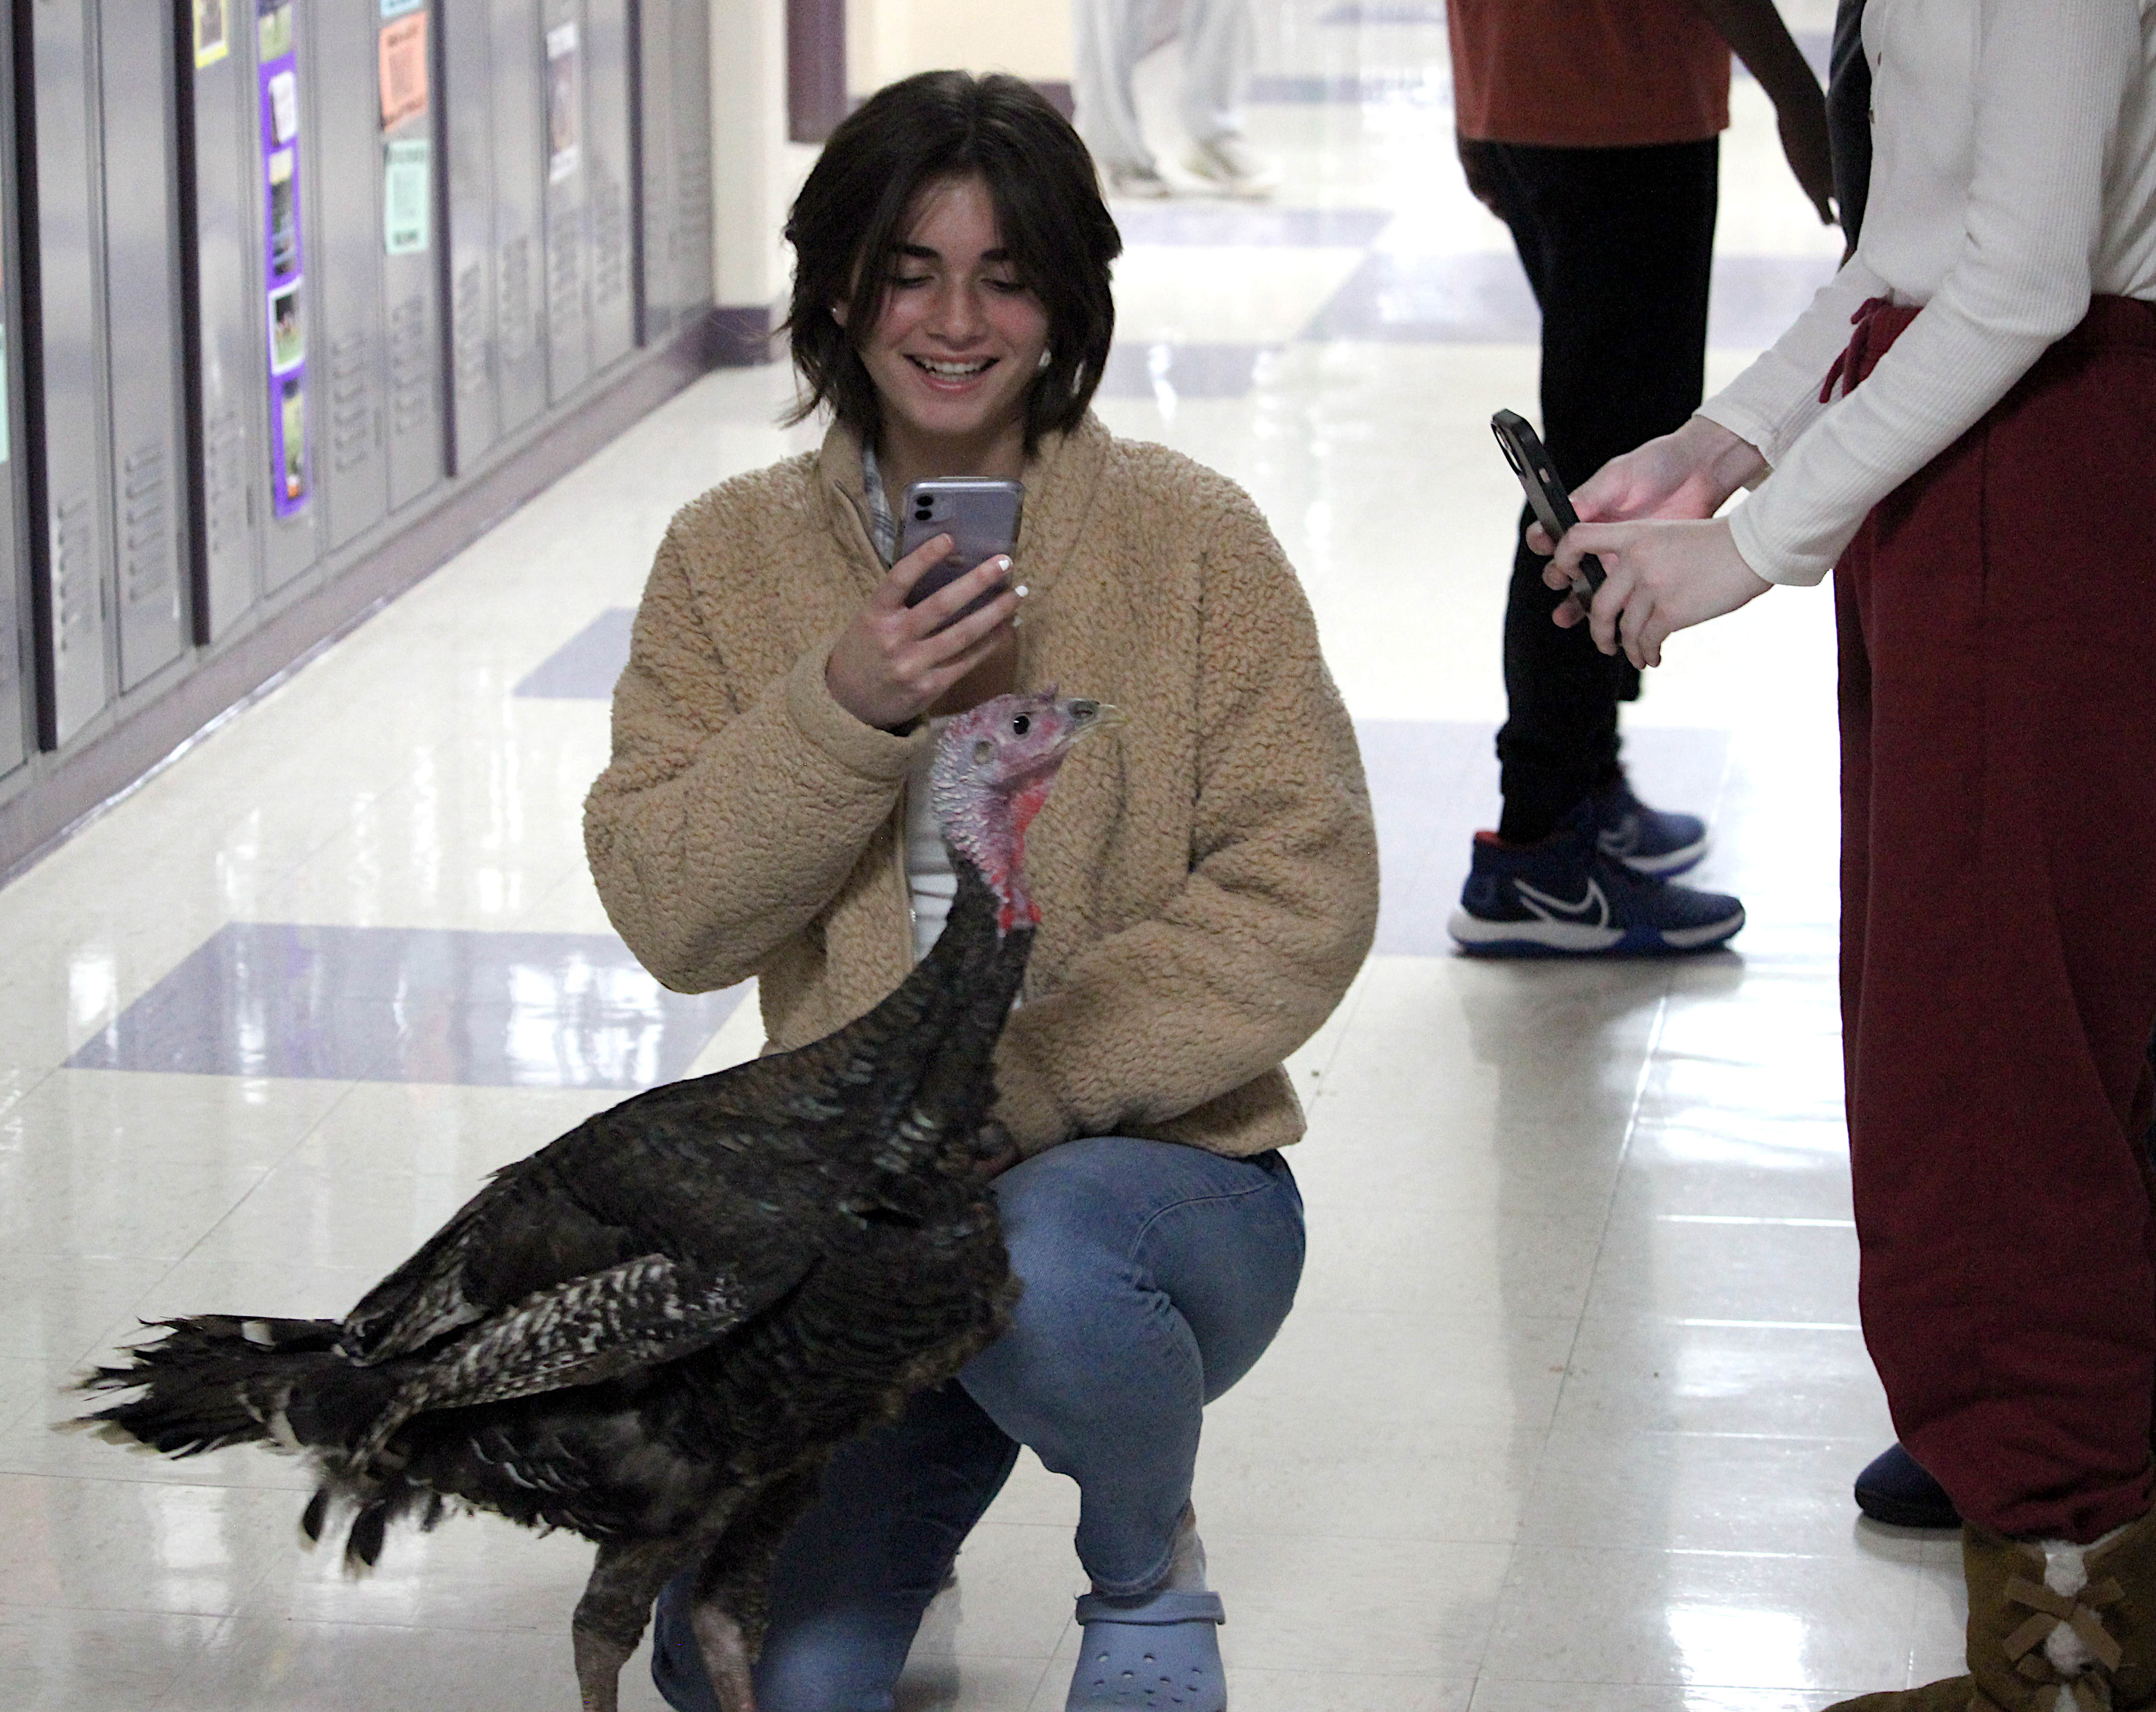 Students at the high school feed a turkey